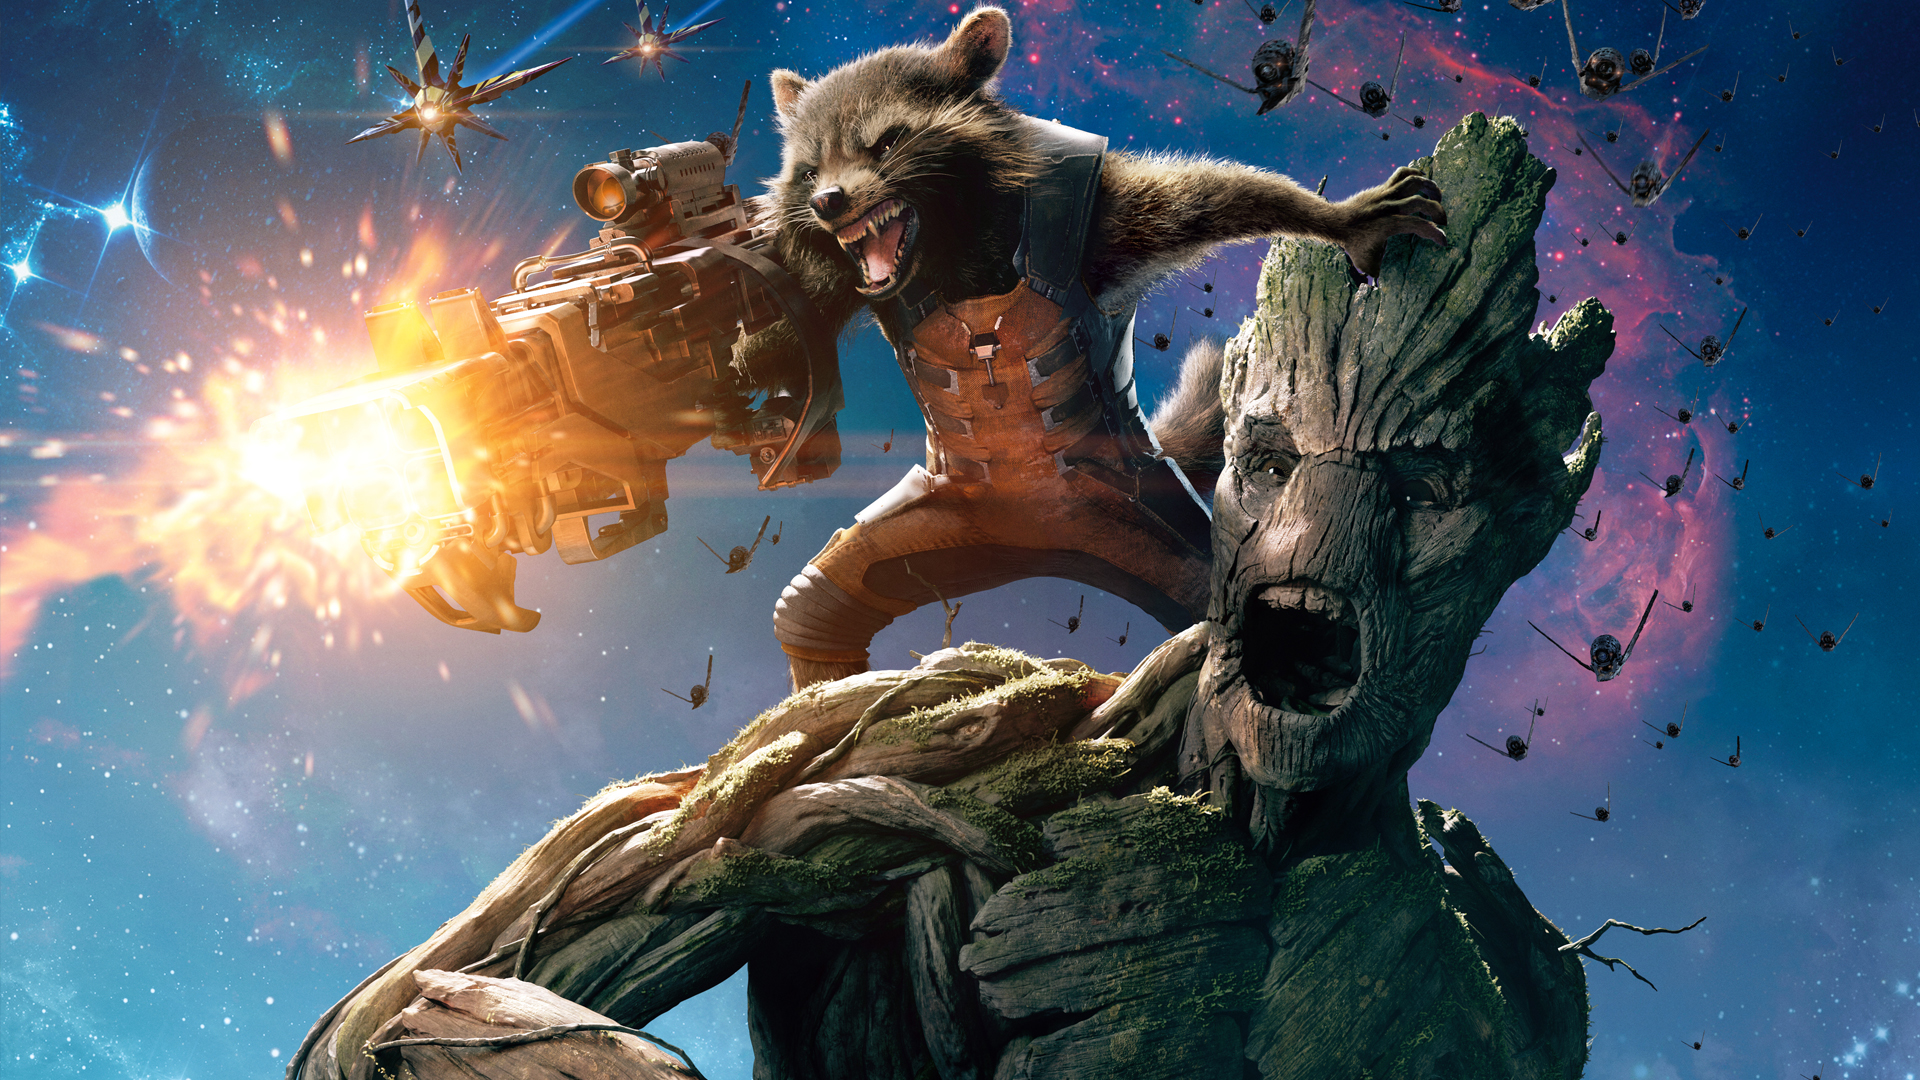 Download wallpaper for 1600x900 resolution | Guardians of the Galaxy ...